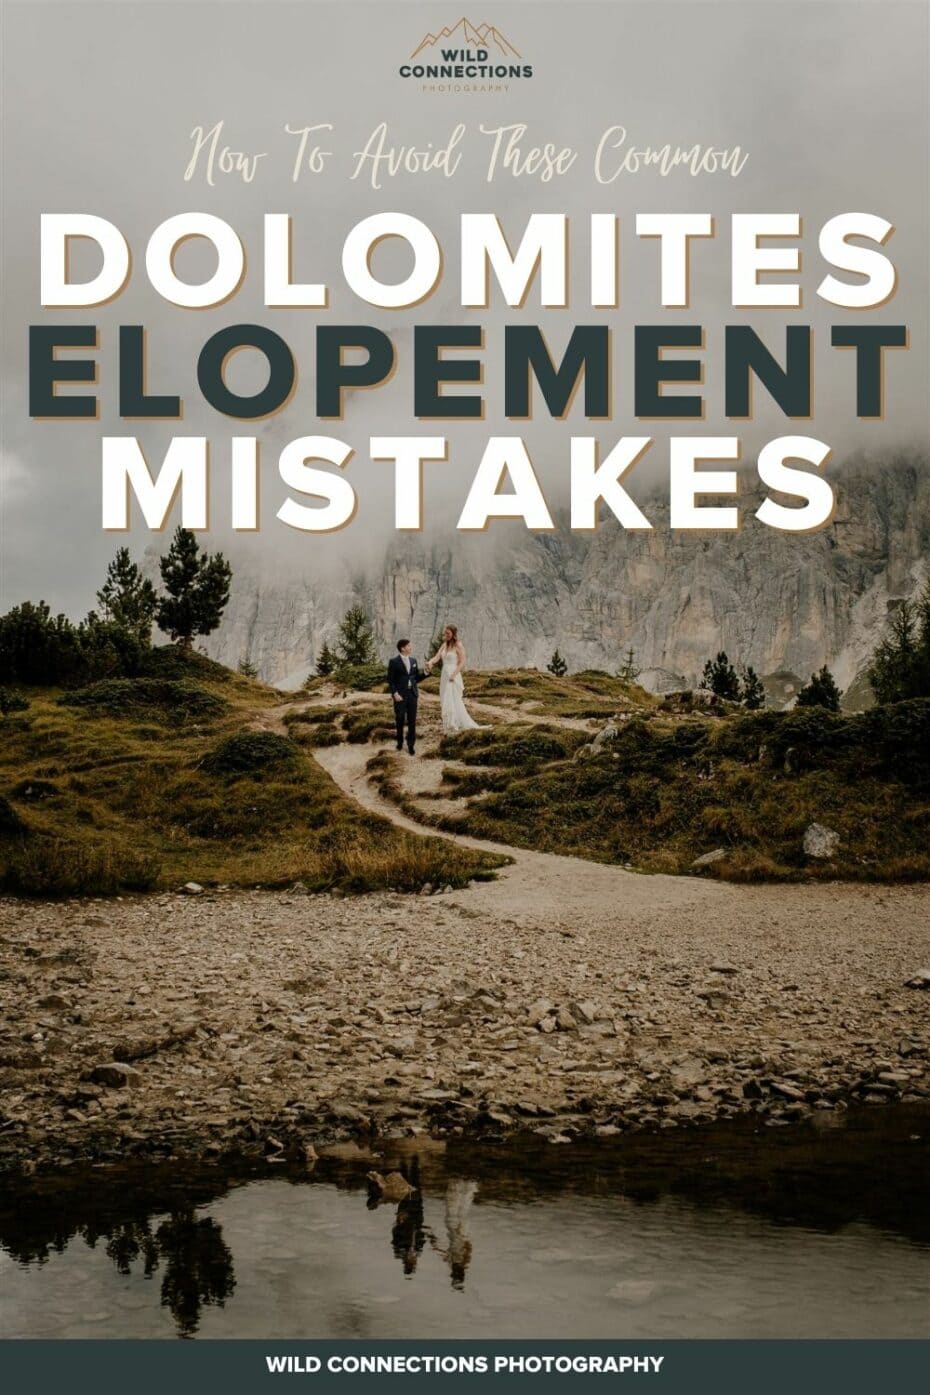 The most common Dolomites elopement planning mistakes